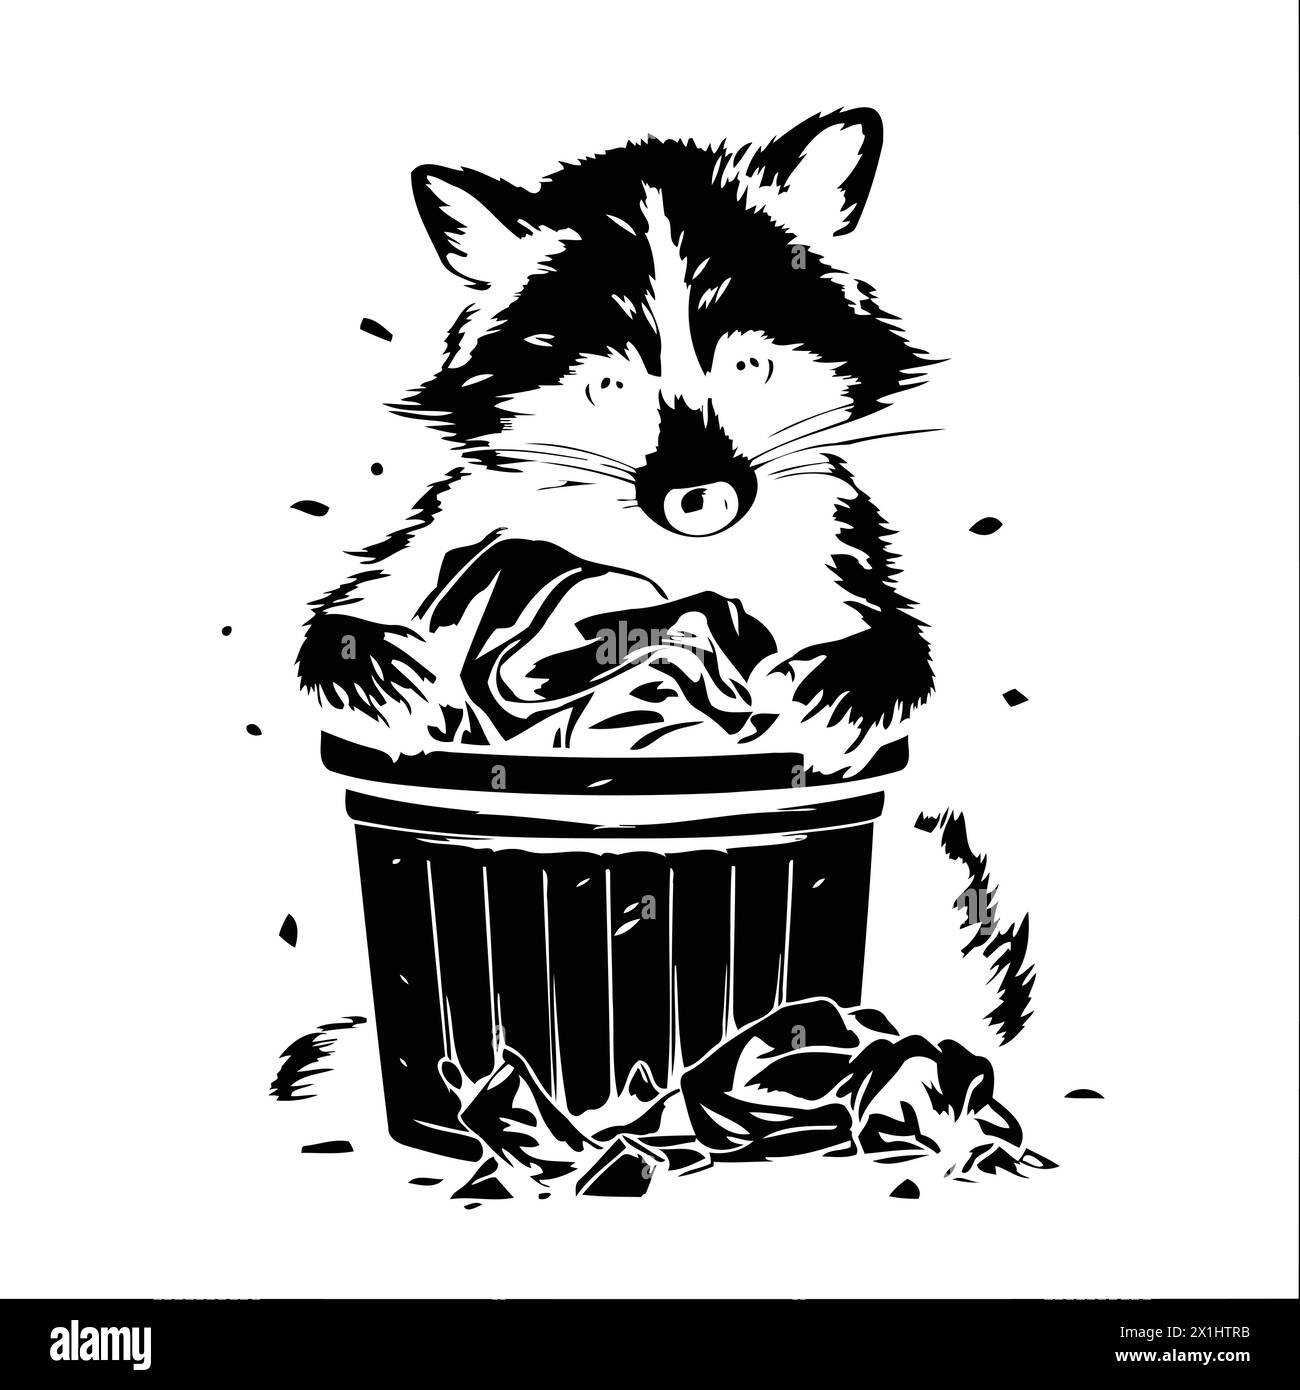 Illustration of a Raccoon in a trash can full of garbage Stock Vector